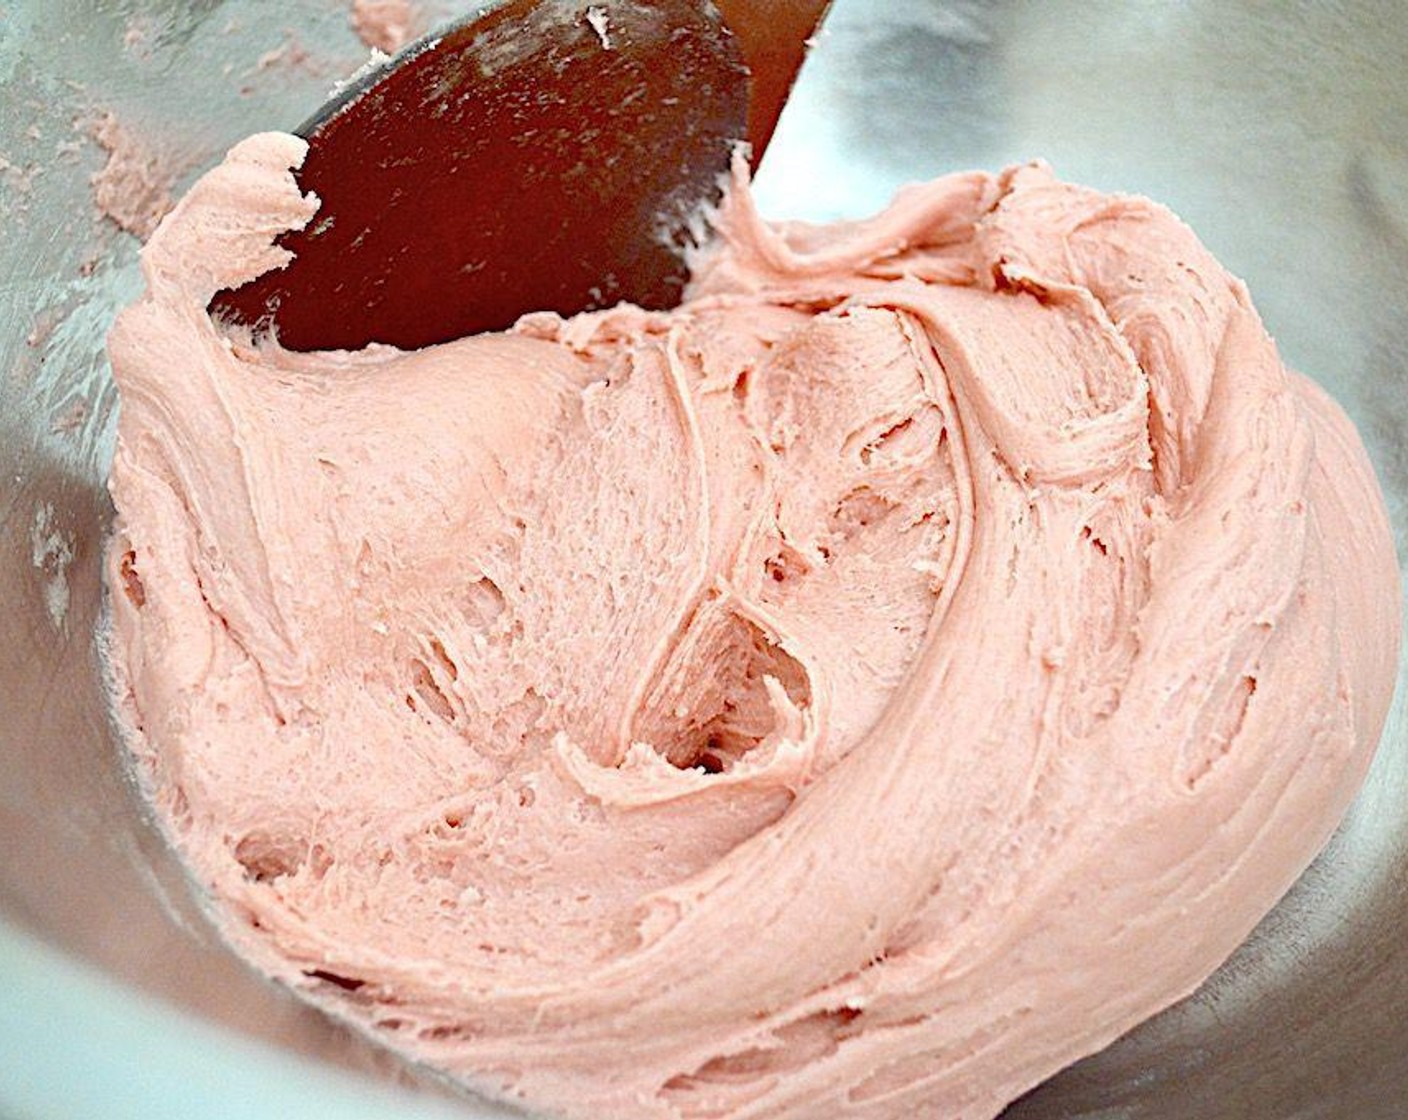 step 2 Mix the Strawberry Cake Mix (1 box), Mascarpone Cheese (1/2 cup), Canola Oil (1/3 cup), Egg (1) and Balsamic Vinegar (1/2 tsp) together in a large mixing bowl. You can use your hands or an electric mixer. It will be extremely thick and sticky, almost like silly putty.